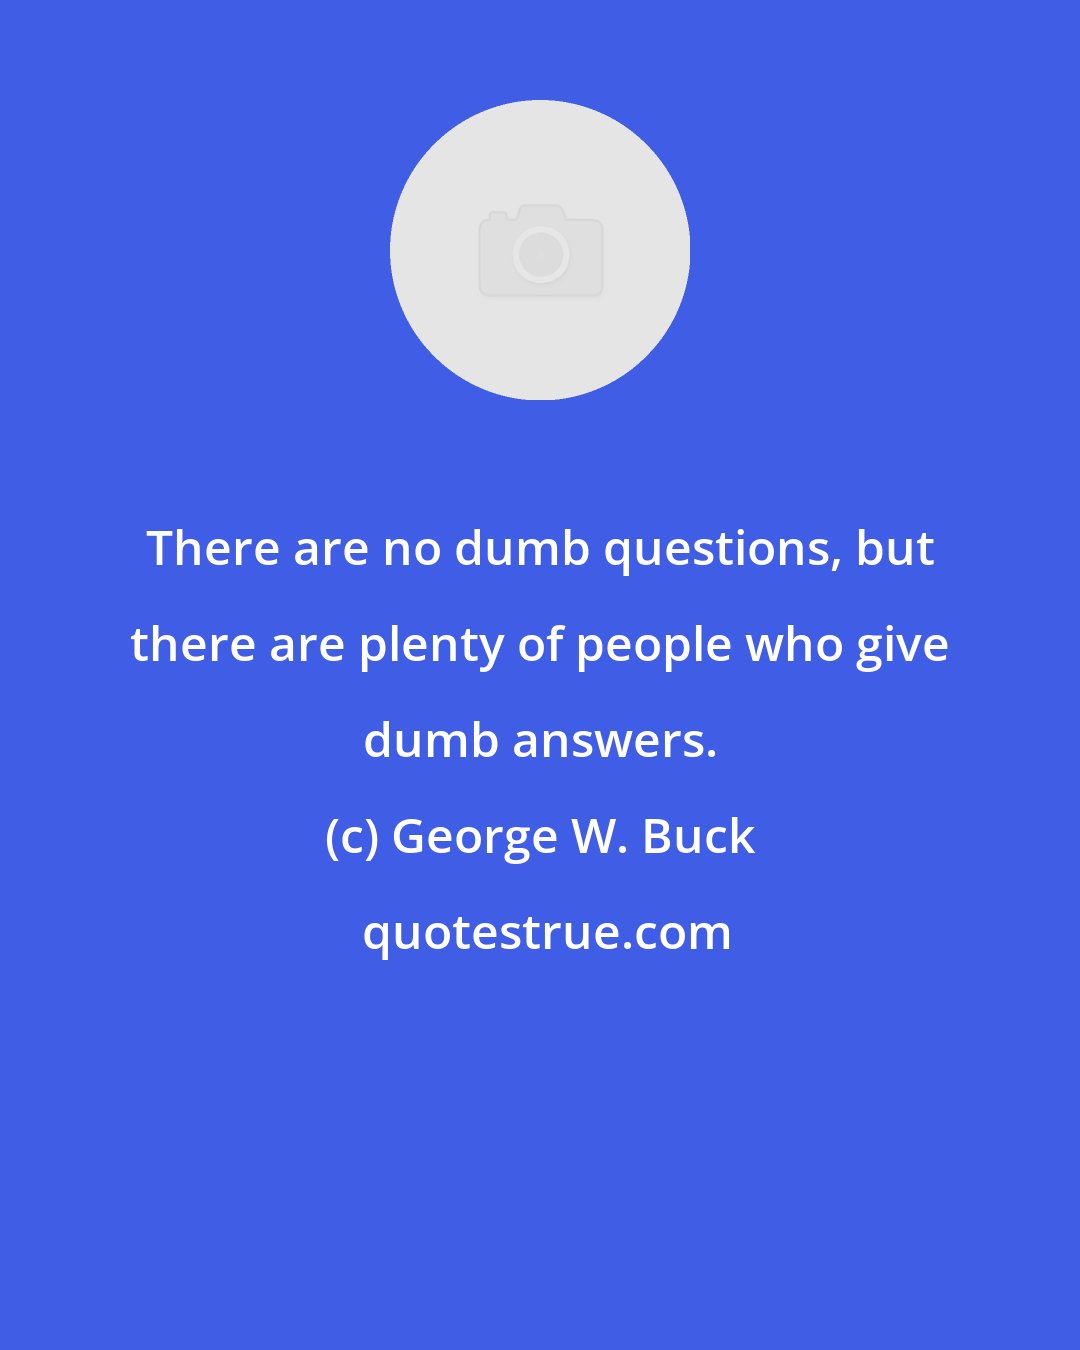 George W. Buck: There are no dumb questions, but there are plenty of people who give dumb answers.